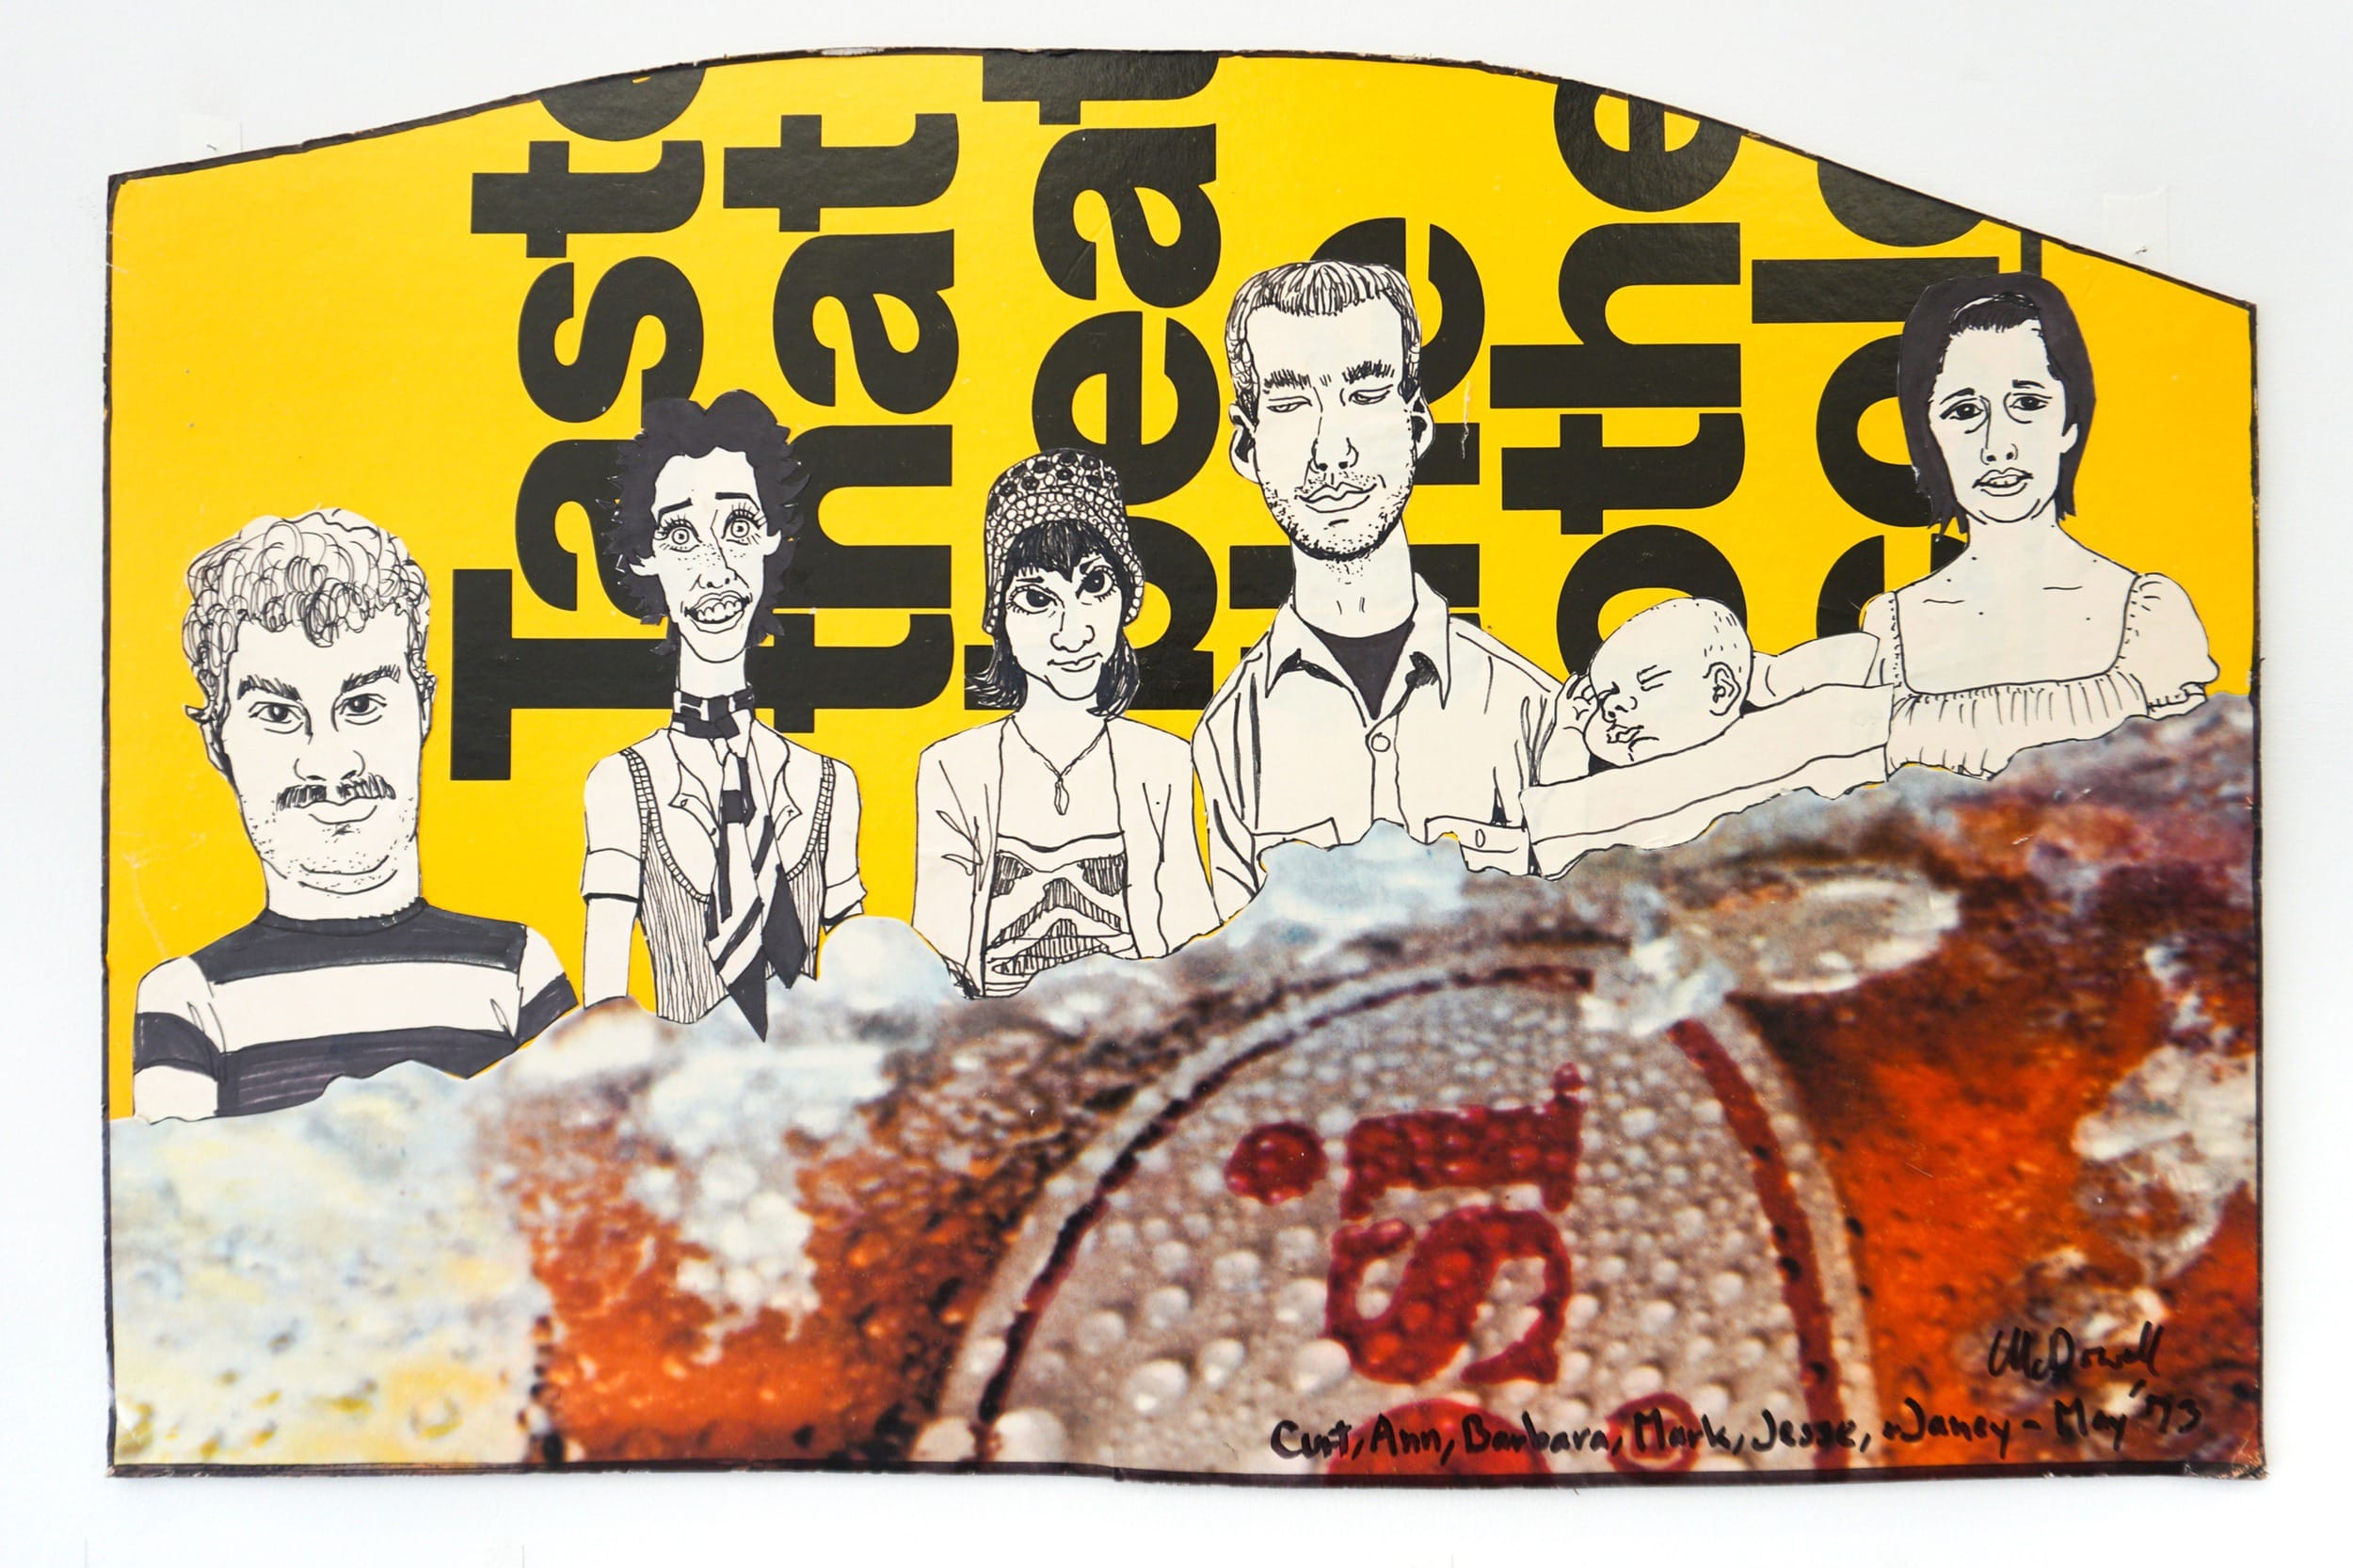  Curt McDowell  Curt, Ann, Barbara, Mark, Jesse, Janey , 1974 Pepsi RP placard, ink, and marker on paper 16 x 24.5 inches 